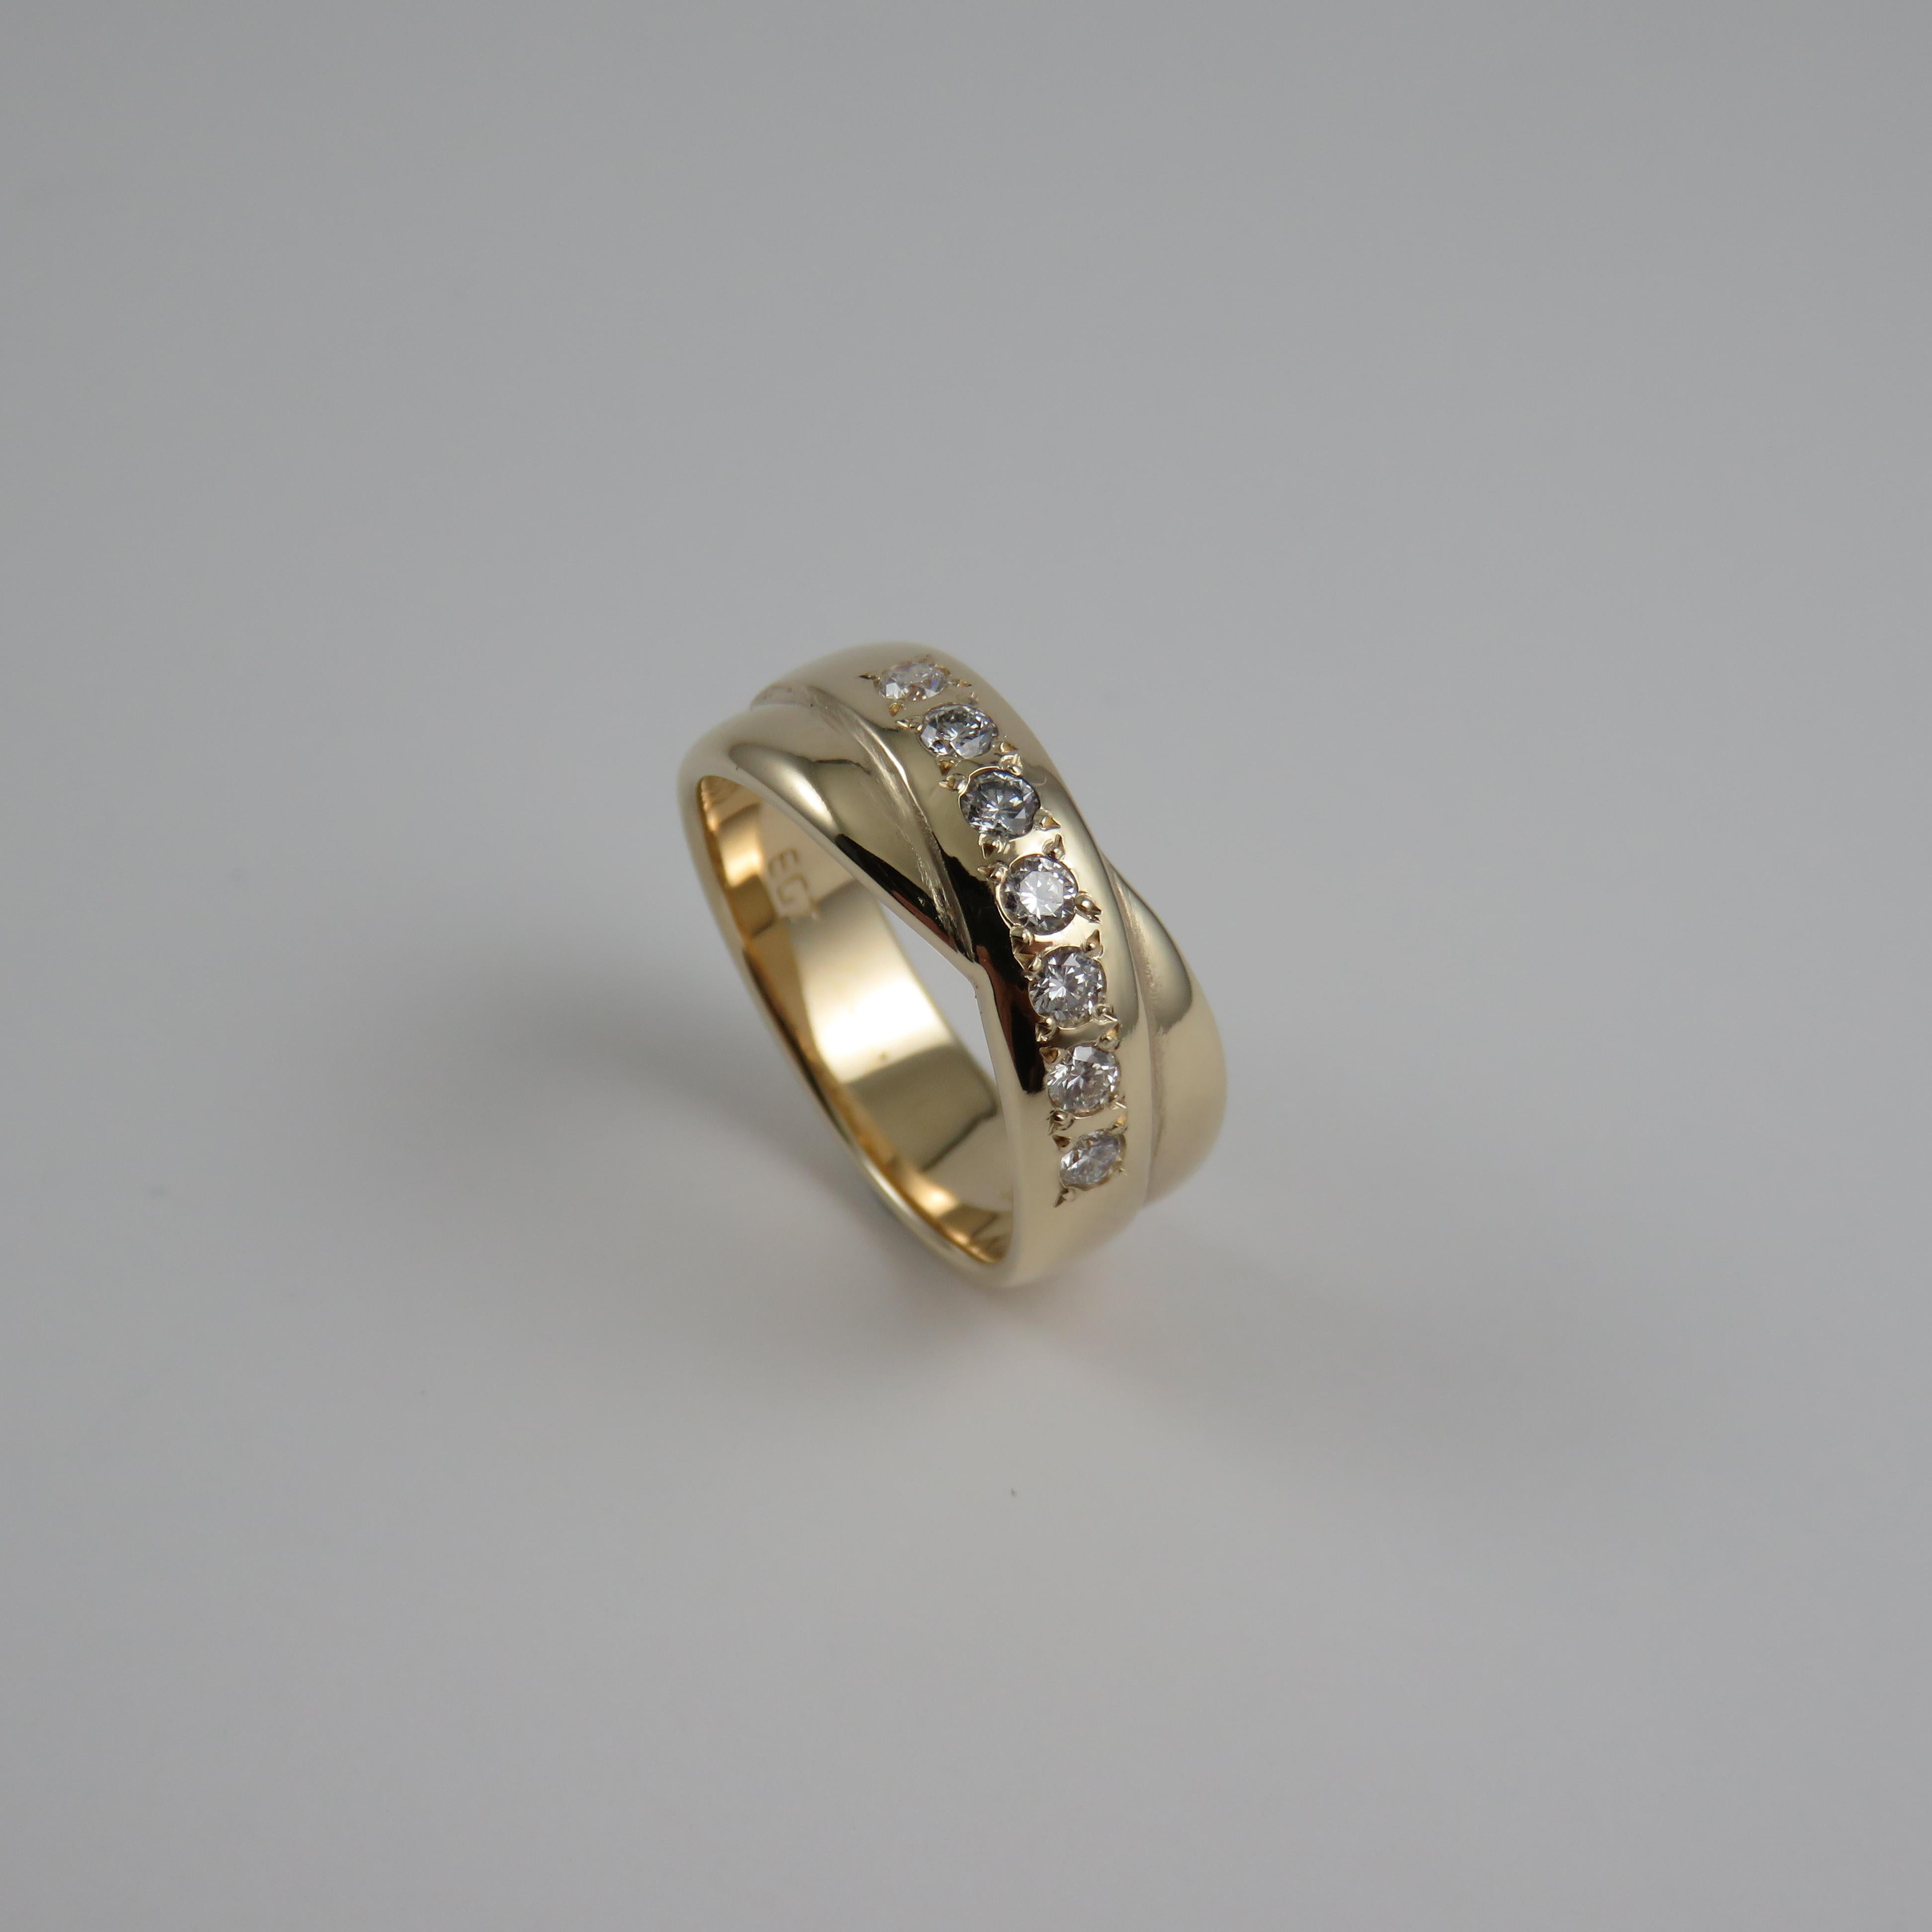 This is a 9k yellow gold eternity ring with a 8mm wide cross-over design, and semi-Russian style featuring seven round brilliant cut diamonds (measuring 2.35-2.4mm) and totaling 0.35 carats that are grain set for a close, secure hold.  The ring has